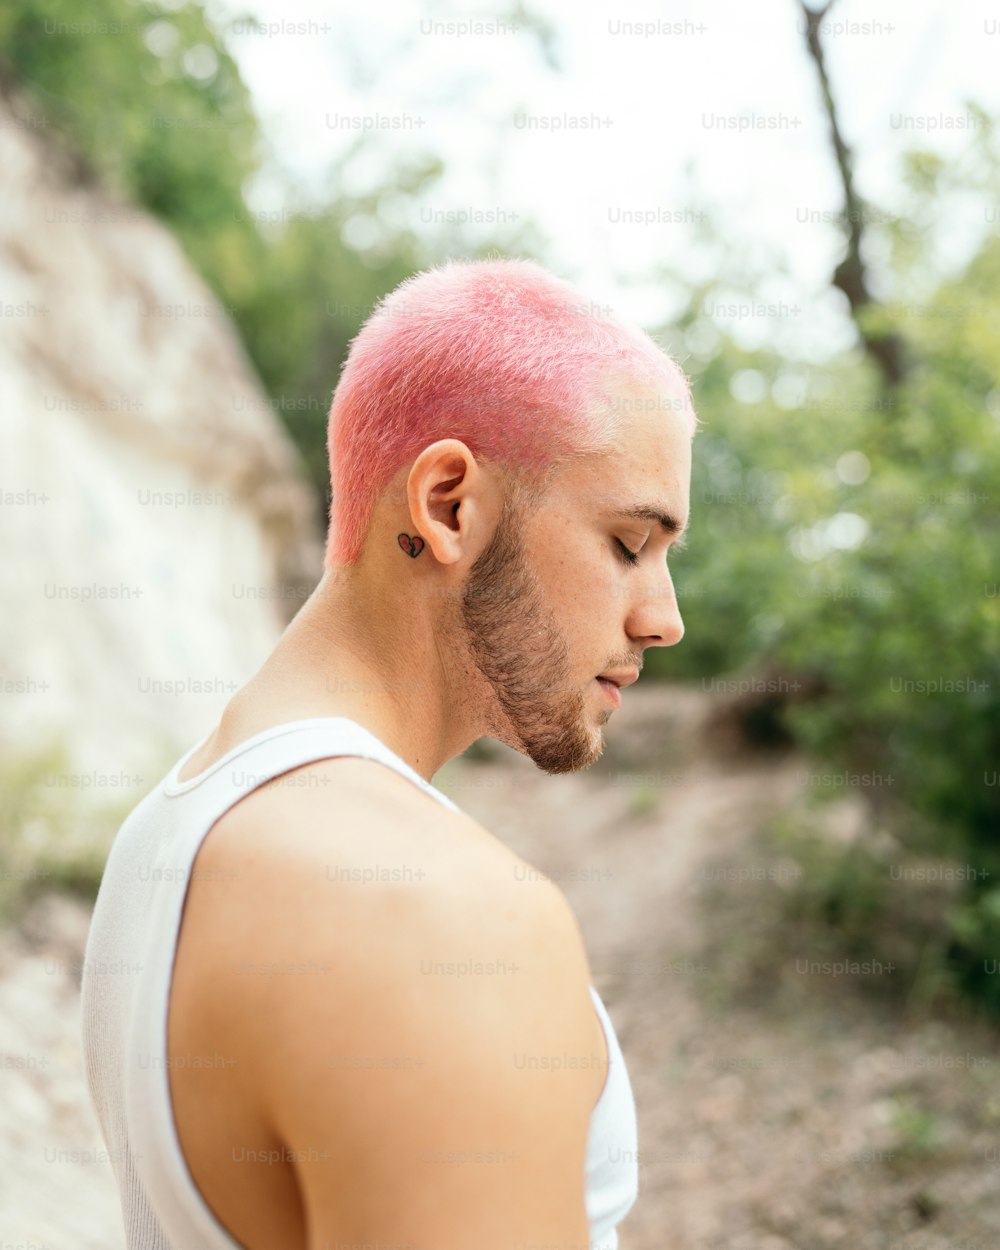 a man with pink hair and a white tank top